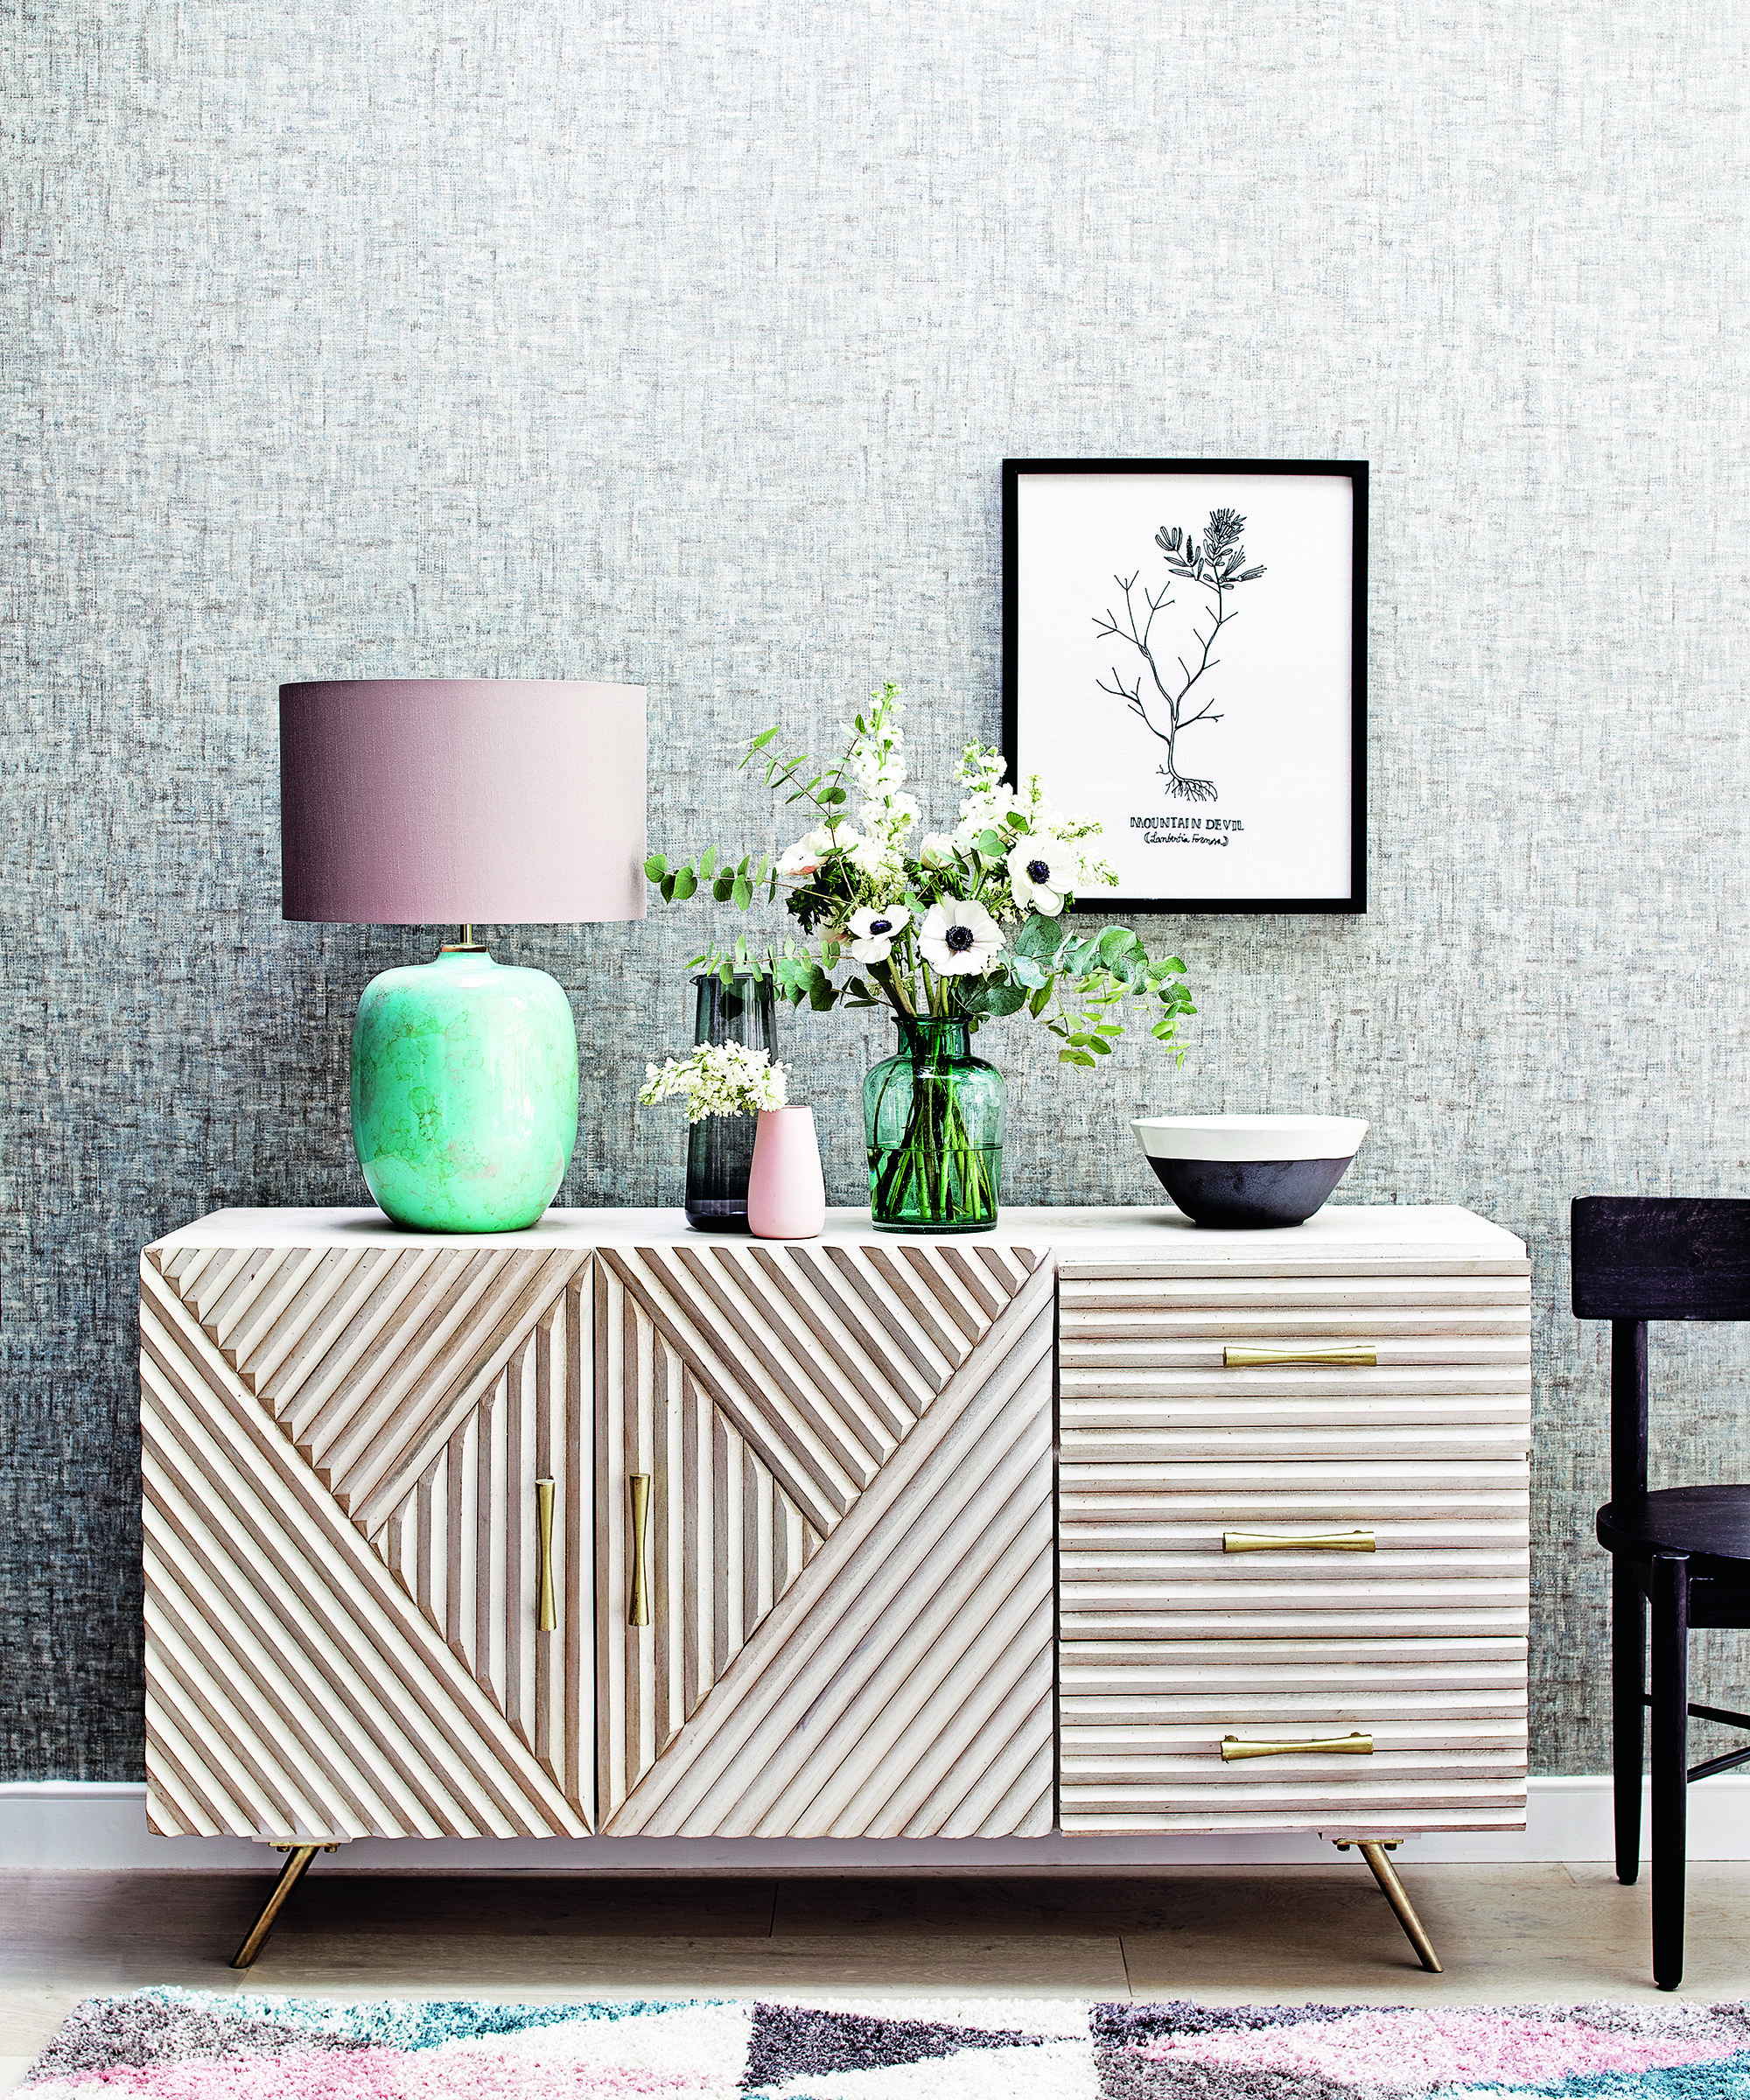 Grey living room ideas featuring a wooden sideboard with green lamp and grey textural wallpaper.